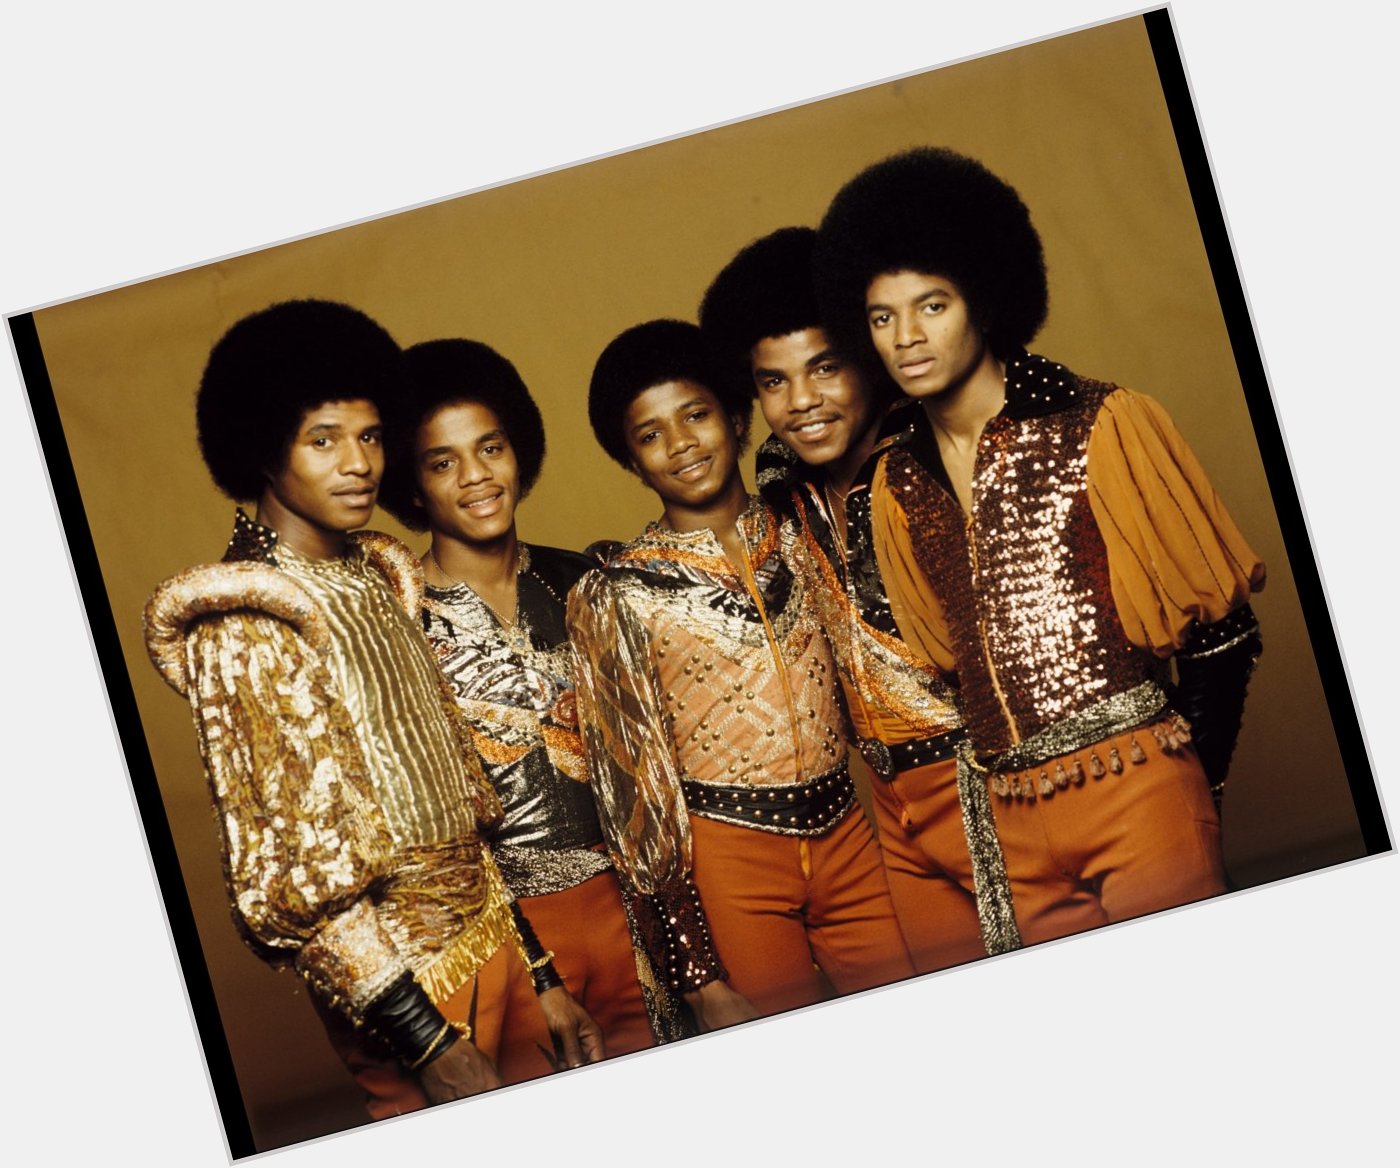 <a href="/hot-men/the-jacksons/is-he-reality-show-cancelled-american-dream-accurate">The Jacksons</a>  